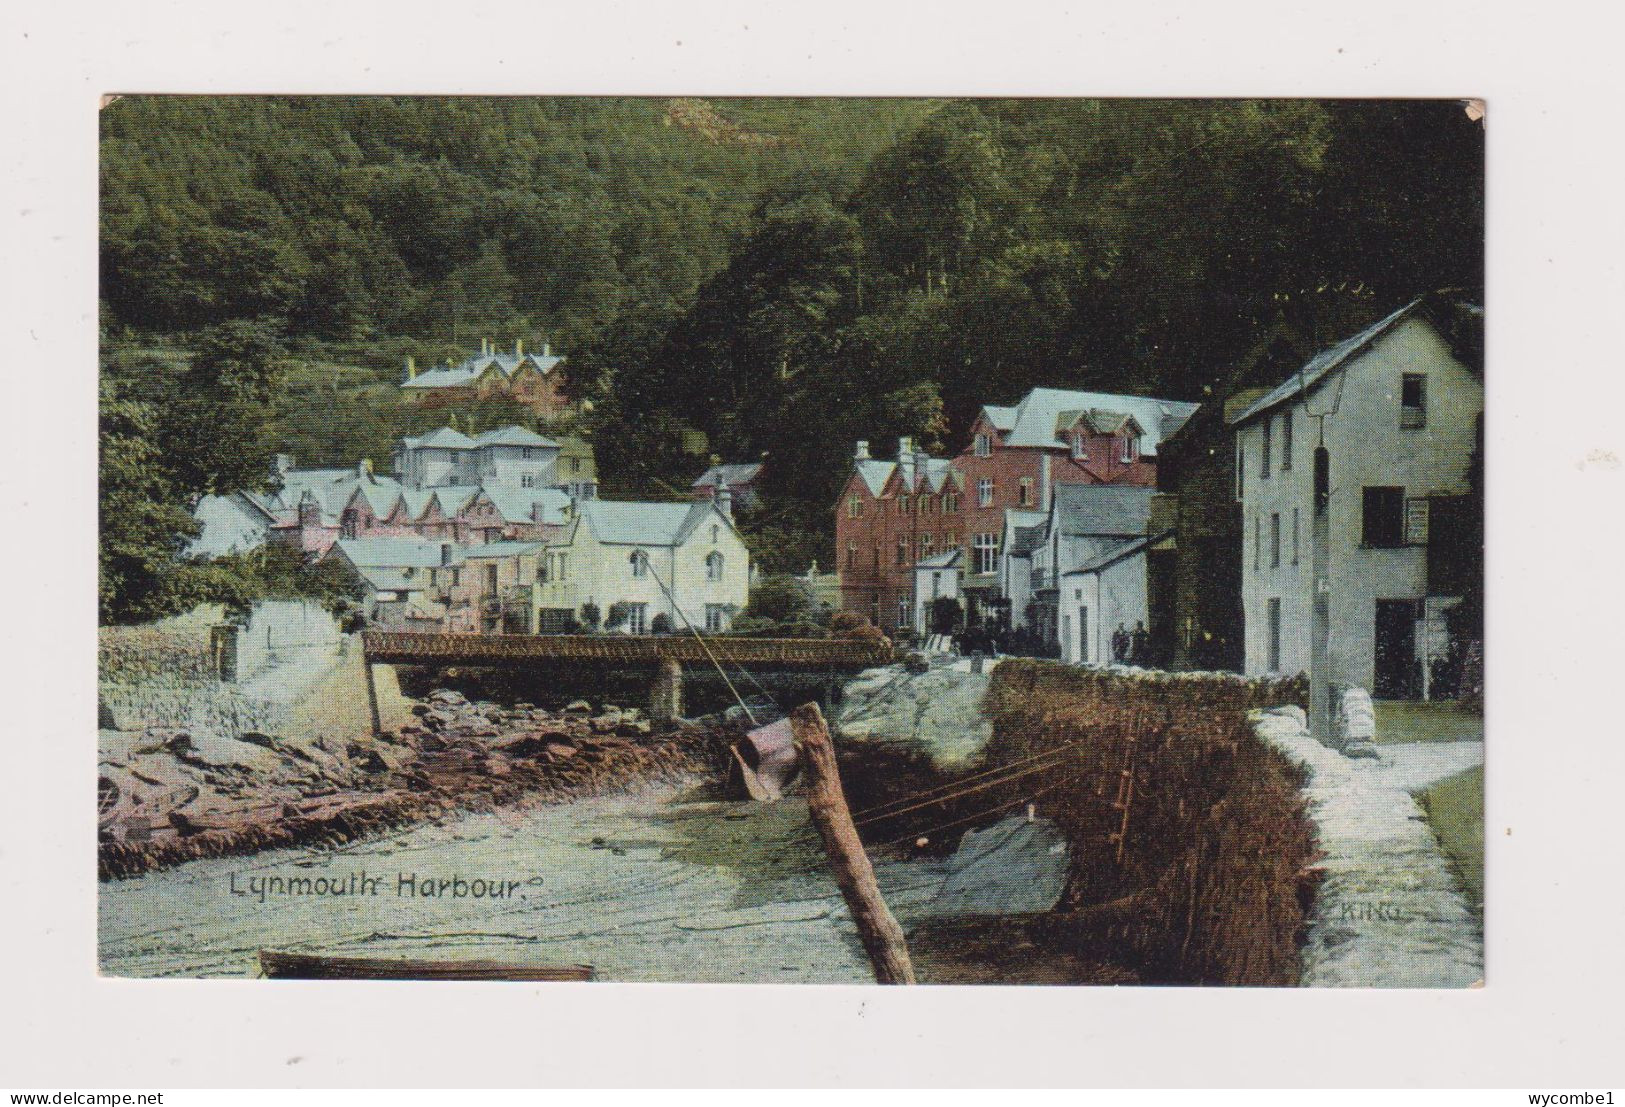 ENGLAND - Lynmouth Harbour Unused Vintage Postcard - Lynmouth & Lynton